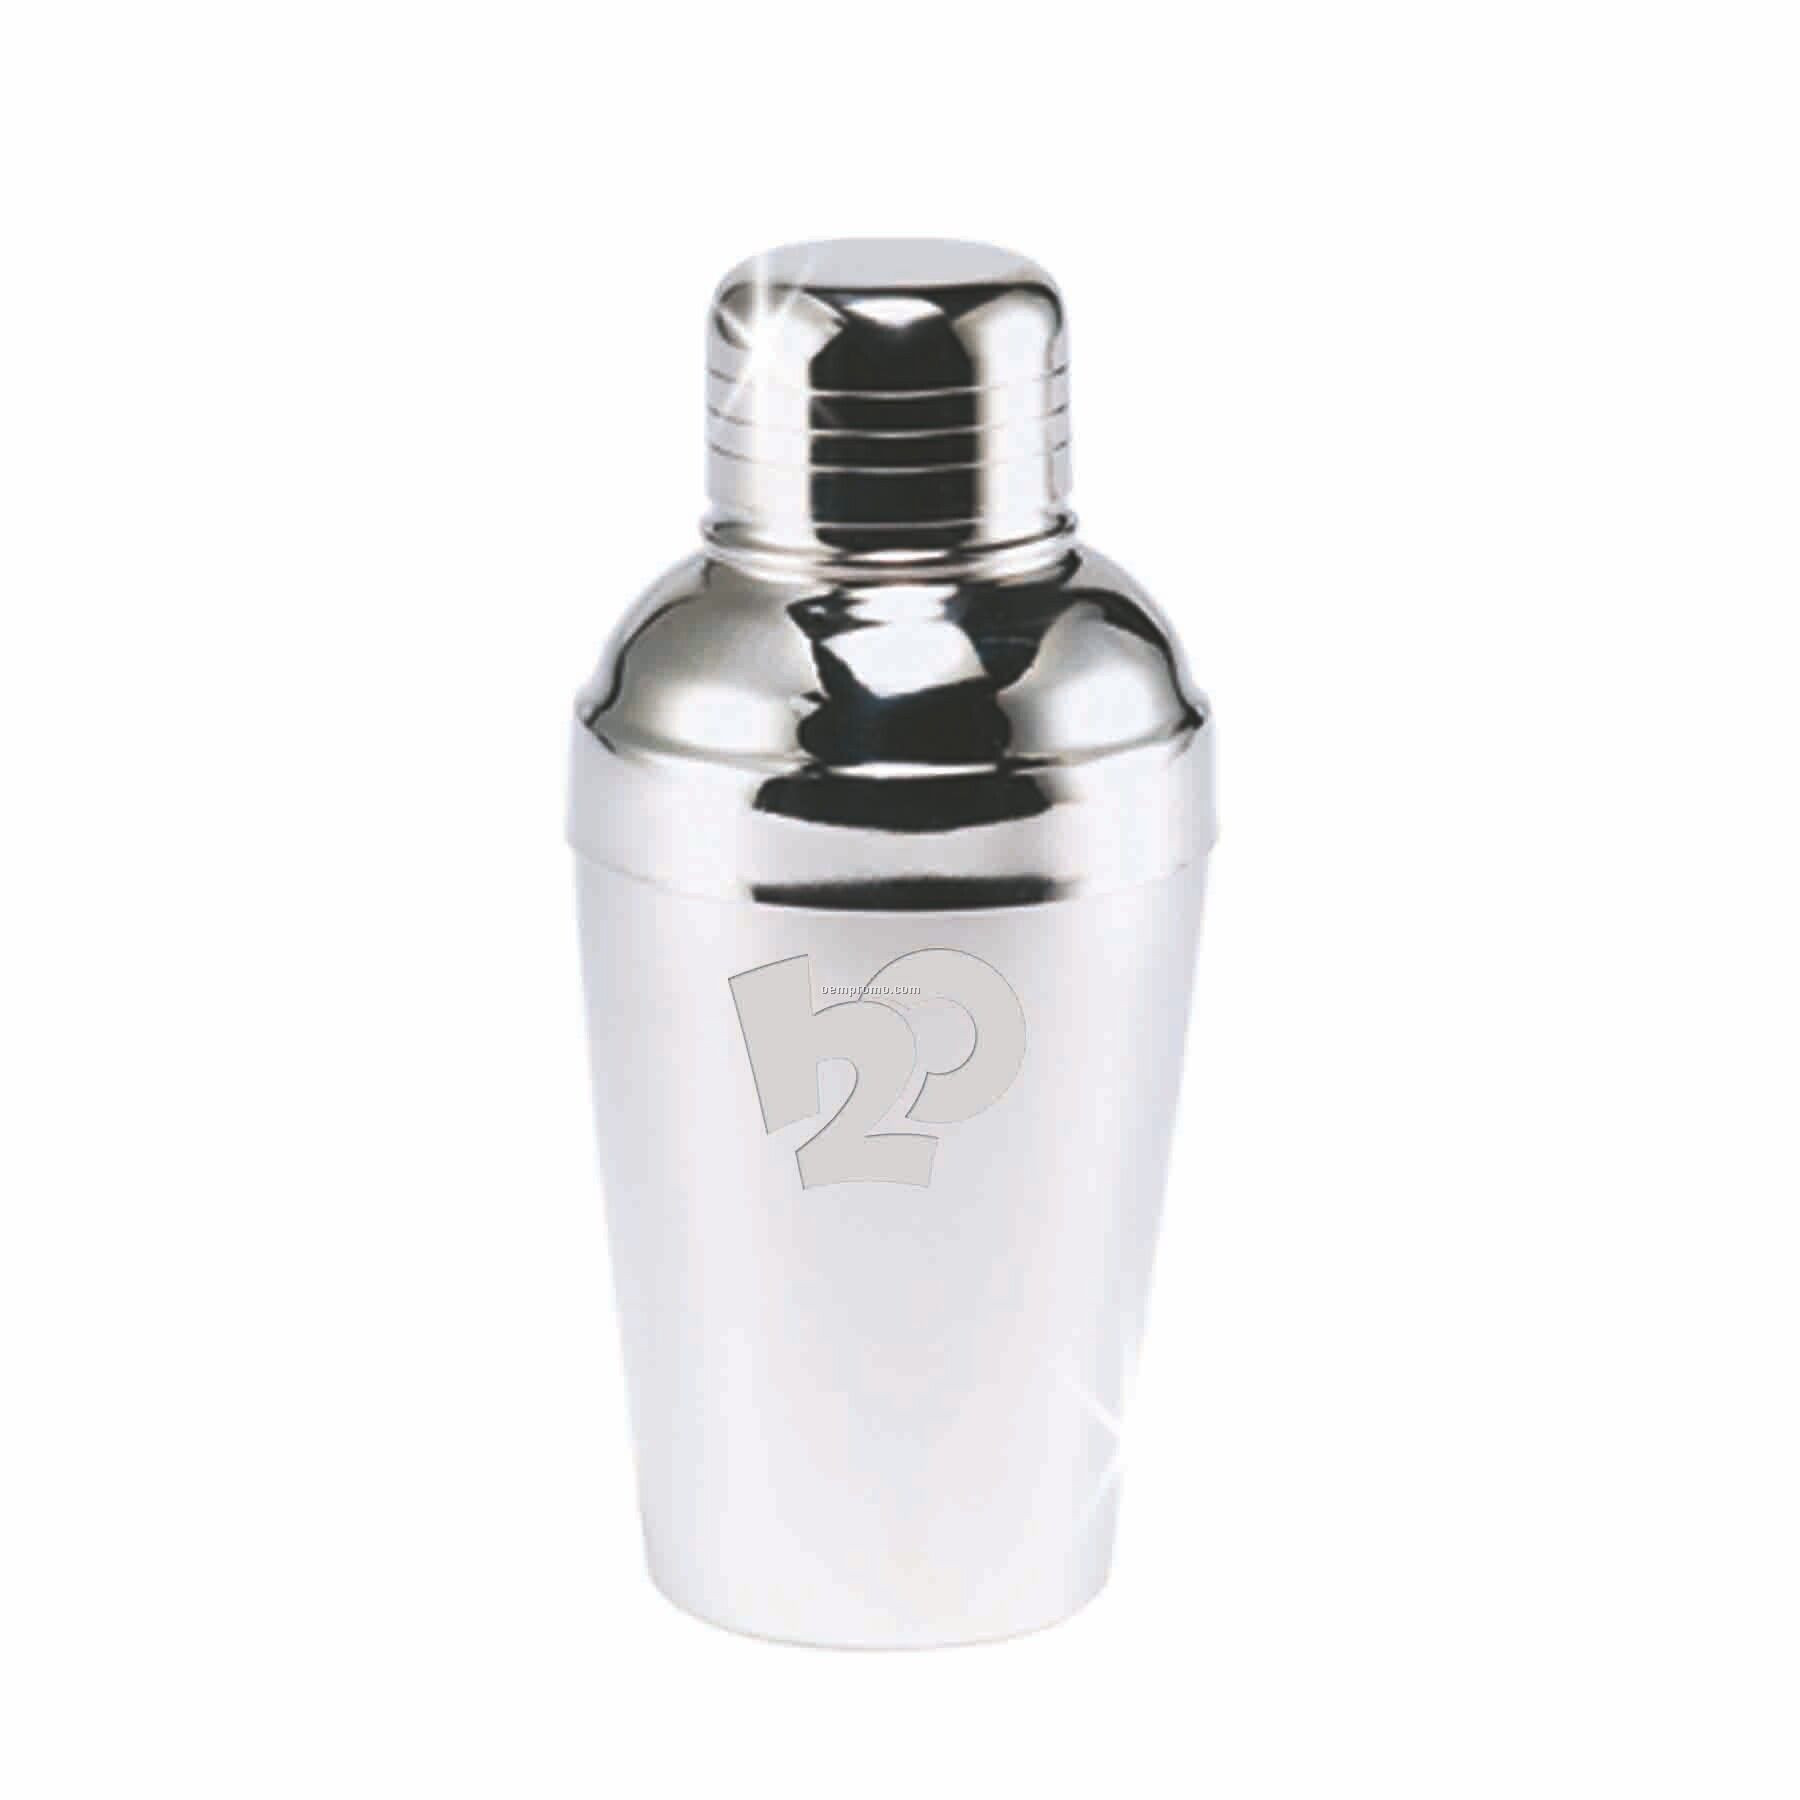 8 Oz. Stainless Steel Martini Selection Shaker (Deep Etch)